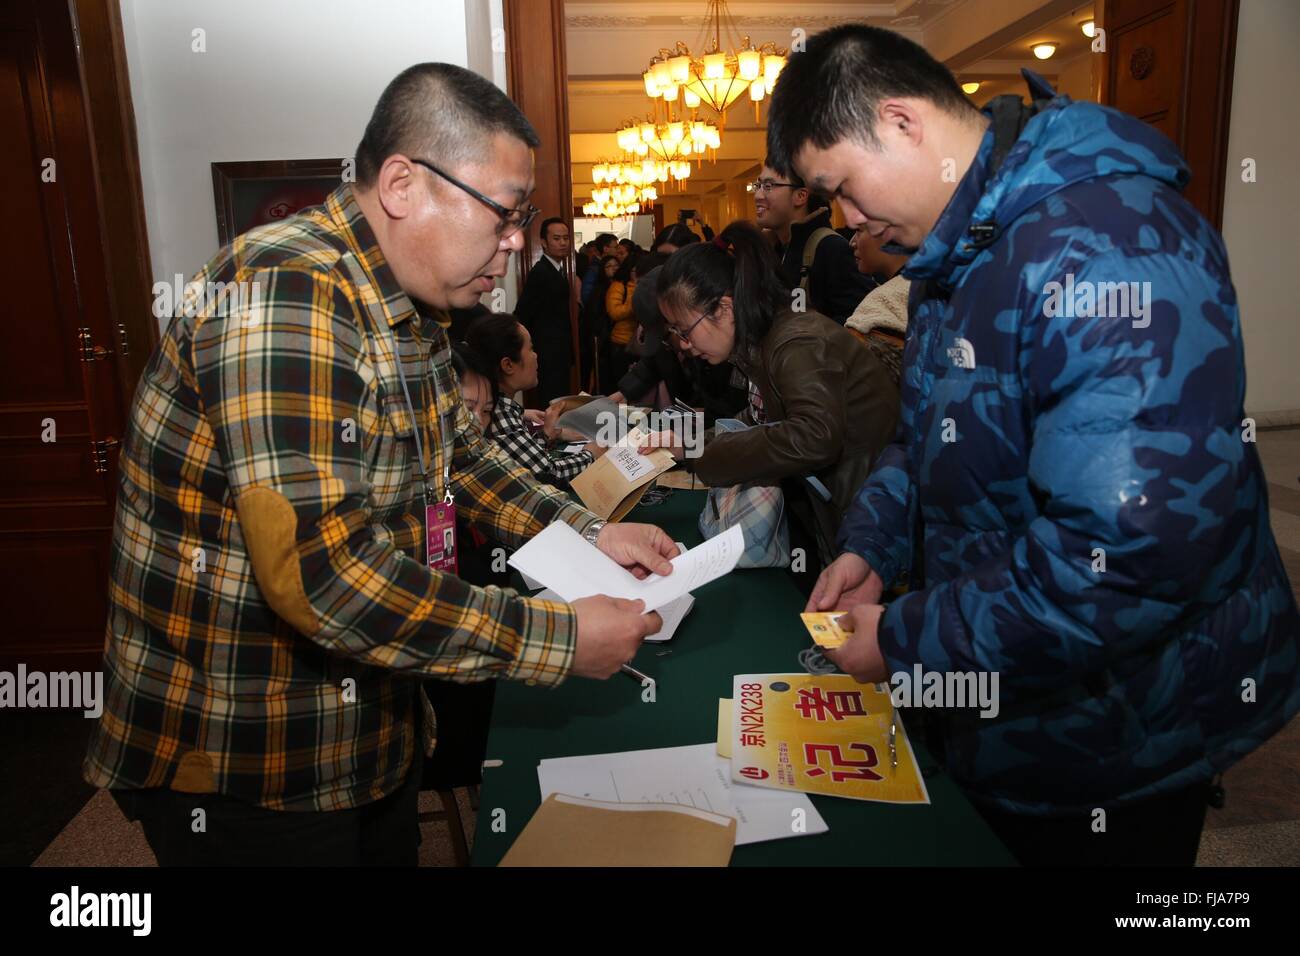 Beijing, China. 1st Mar, 2016. Journalists covering the fourth session of the 12th Chinese People's Political Consultative Conference National Committee get their credentials at the CPPCC auditorium in Beijing, capital of China, March 1, 2016. © Jin Liwang/Xinhua/Alamy Live News Stock Photo